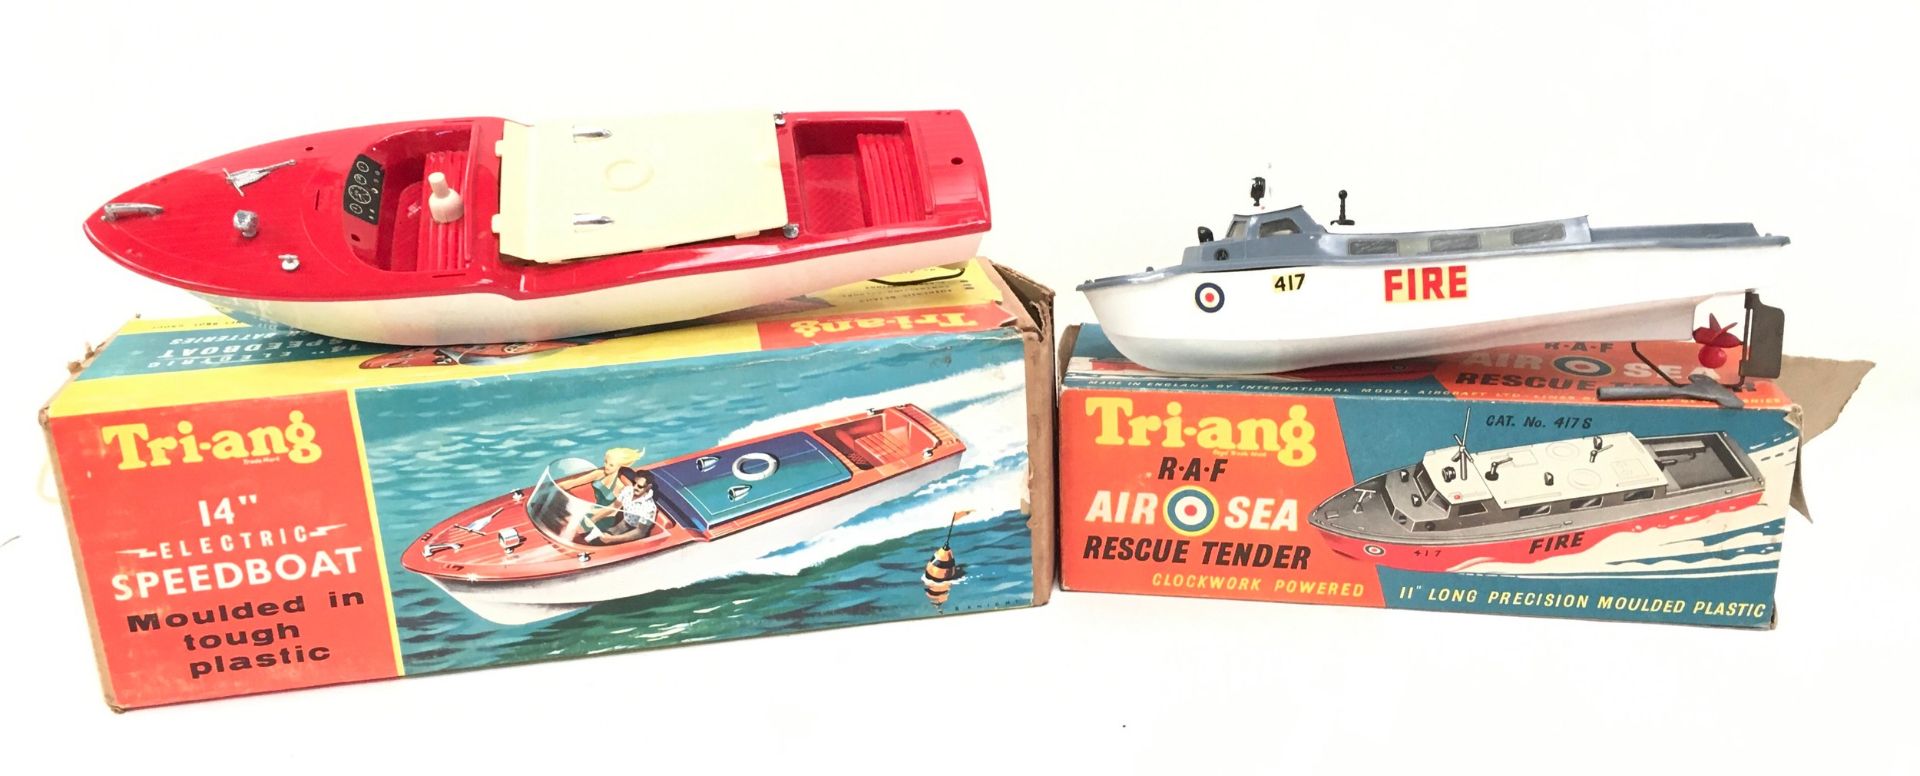 Triang pair of plastic boats to include 415 S 14” Electric Speedboat and 417 S Clockwork operated